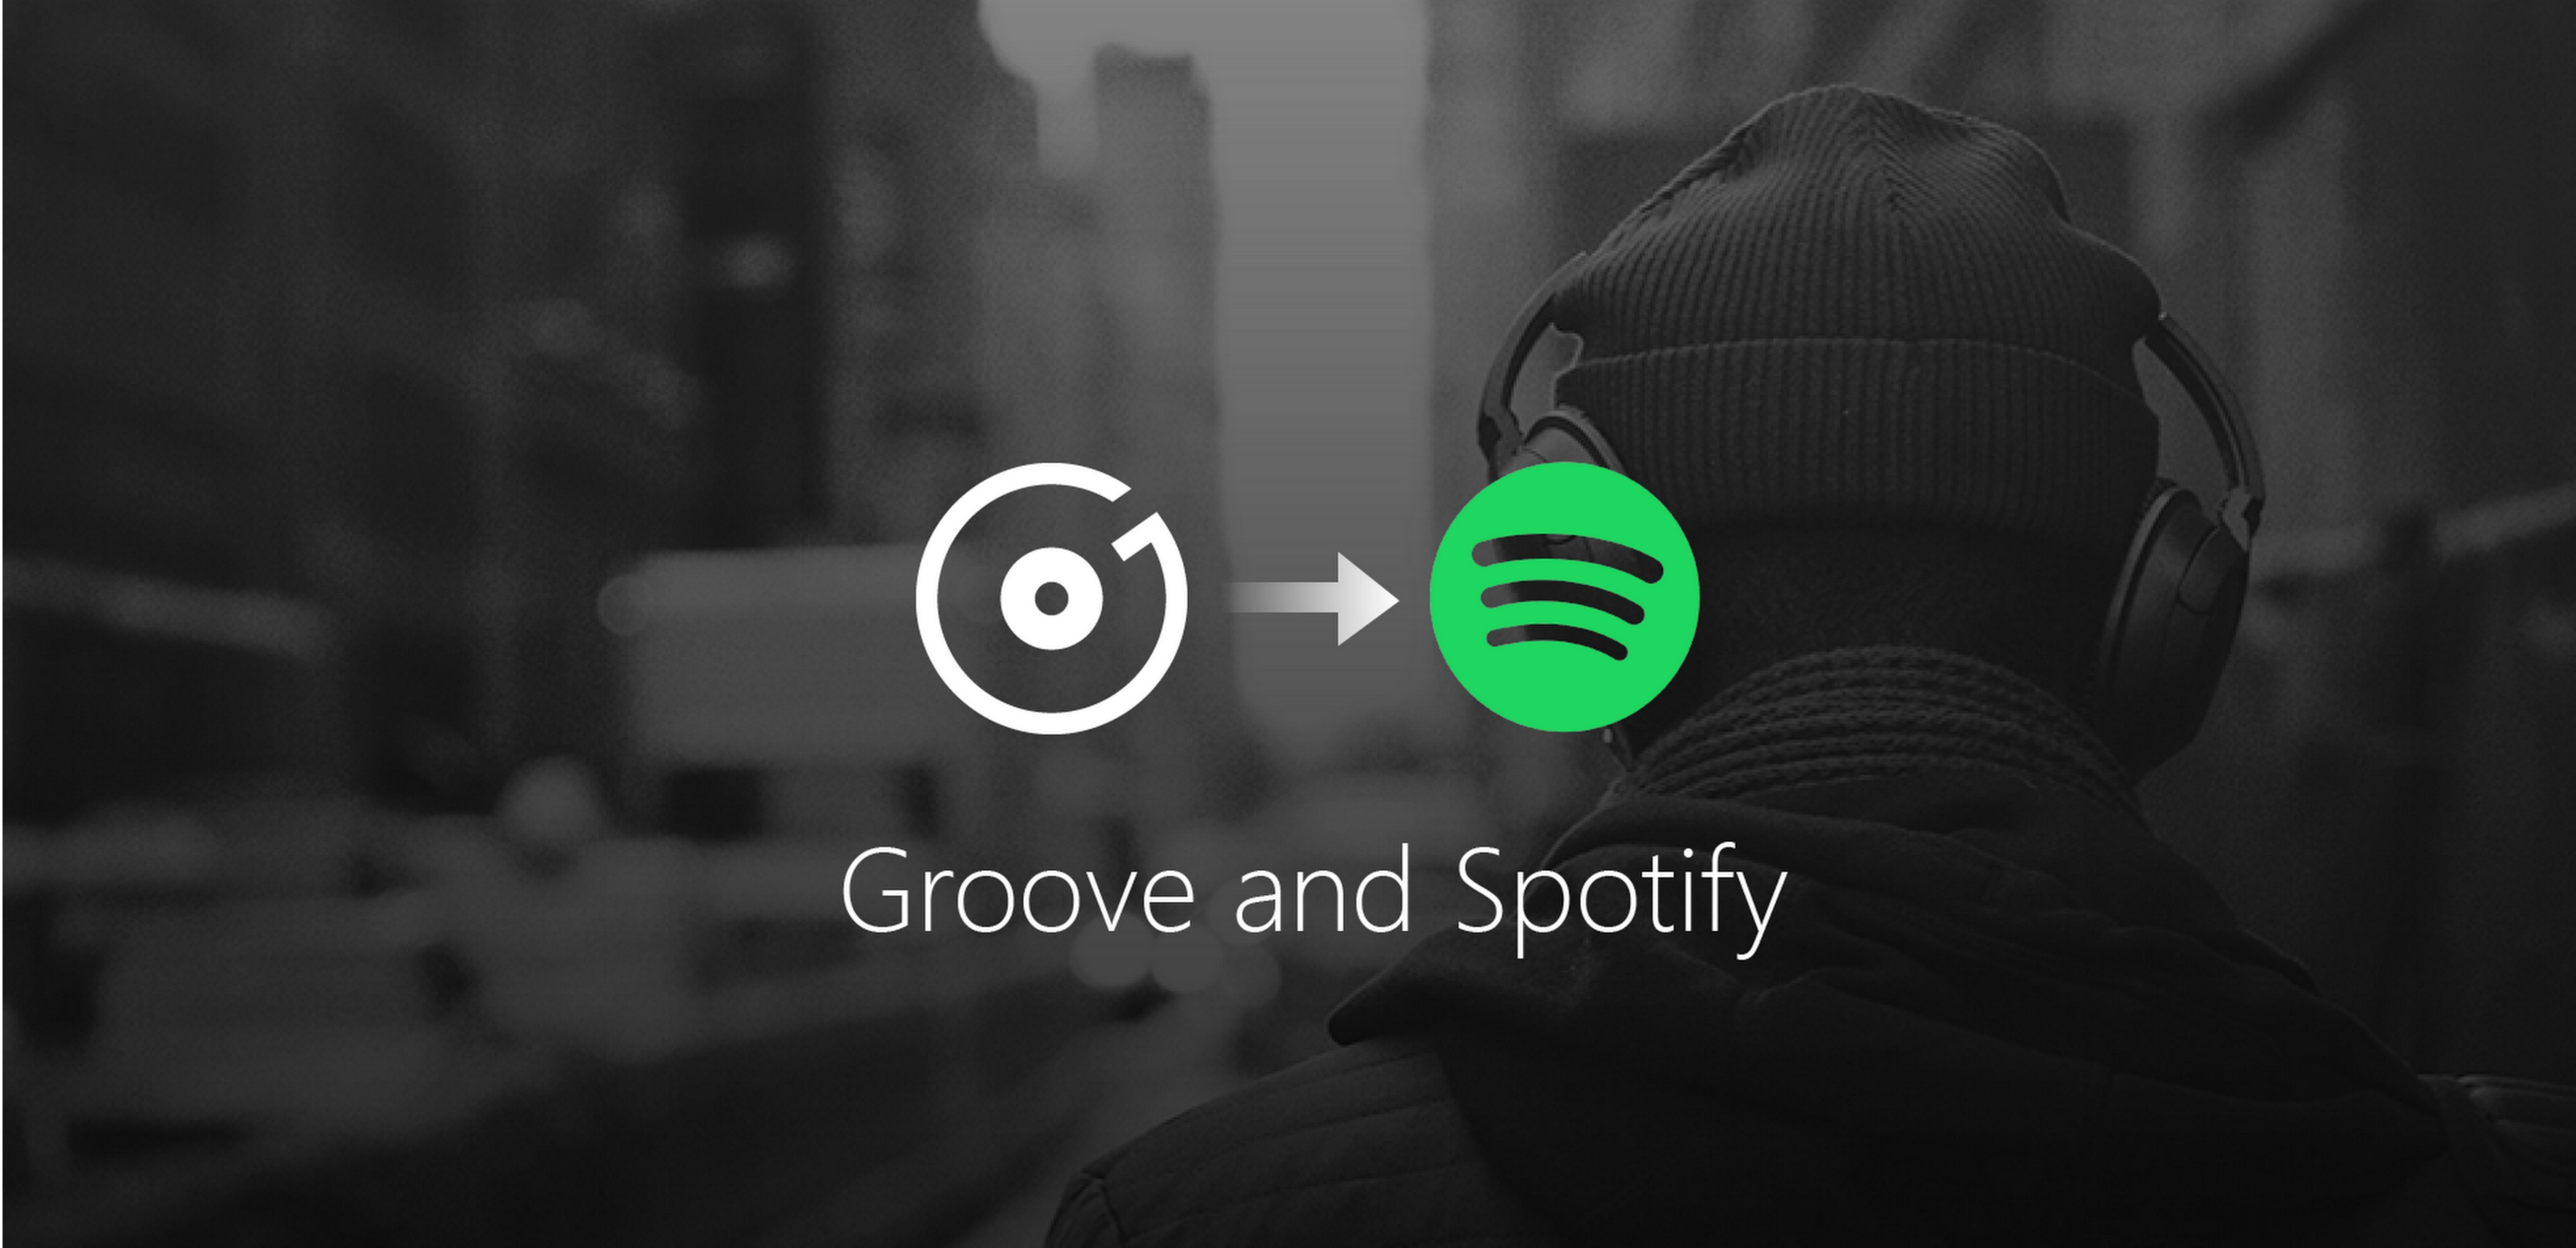 Groove logo with arrow pointing to the right toward the Spotify logo